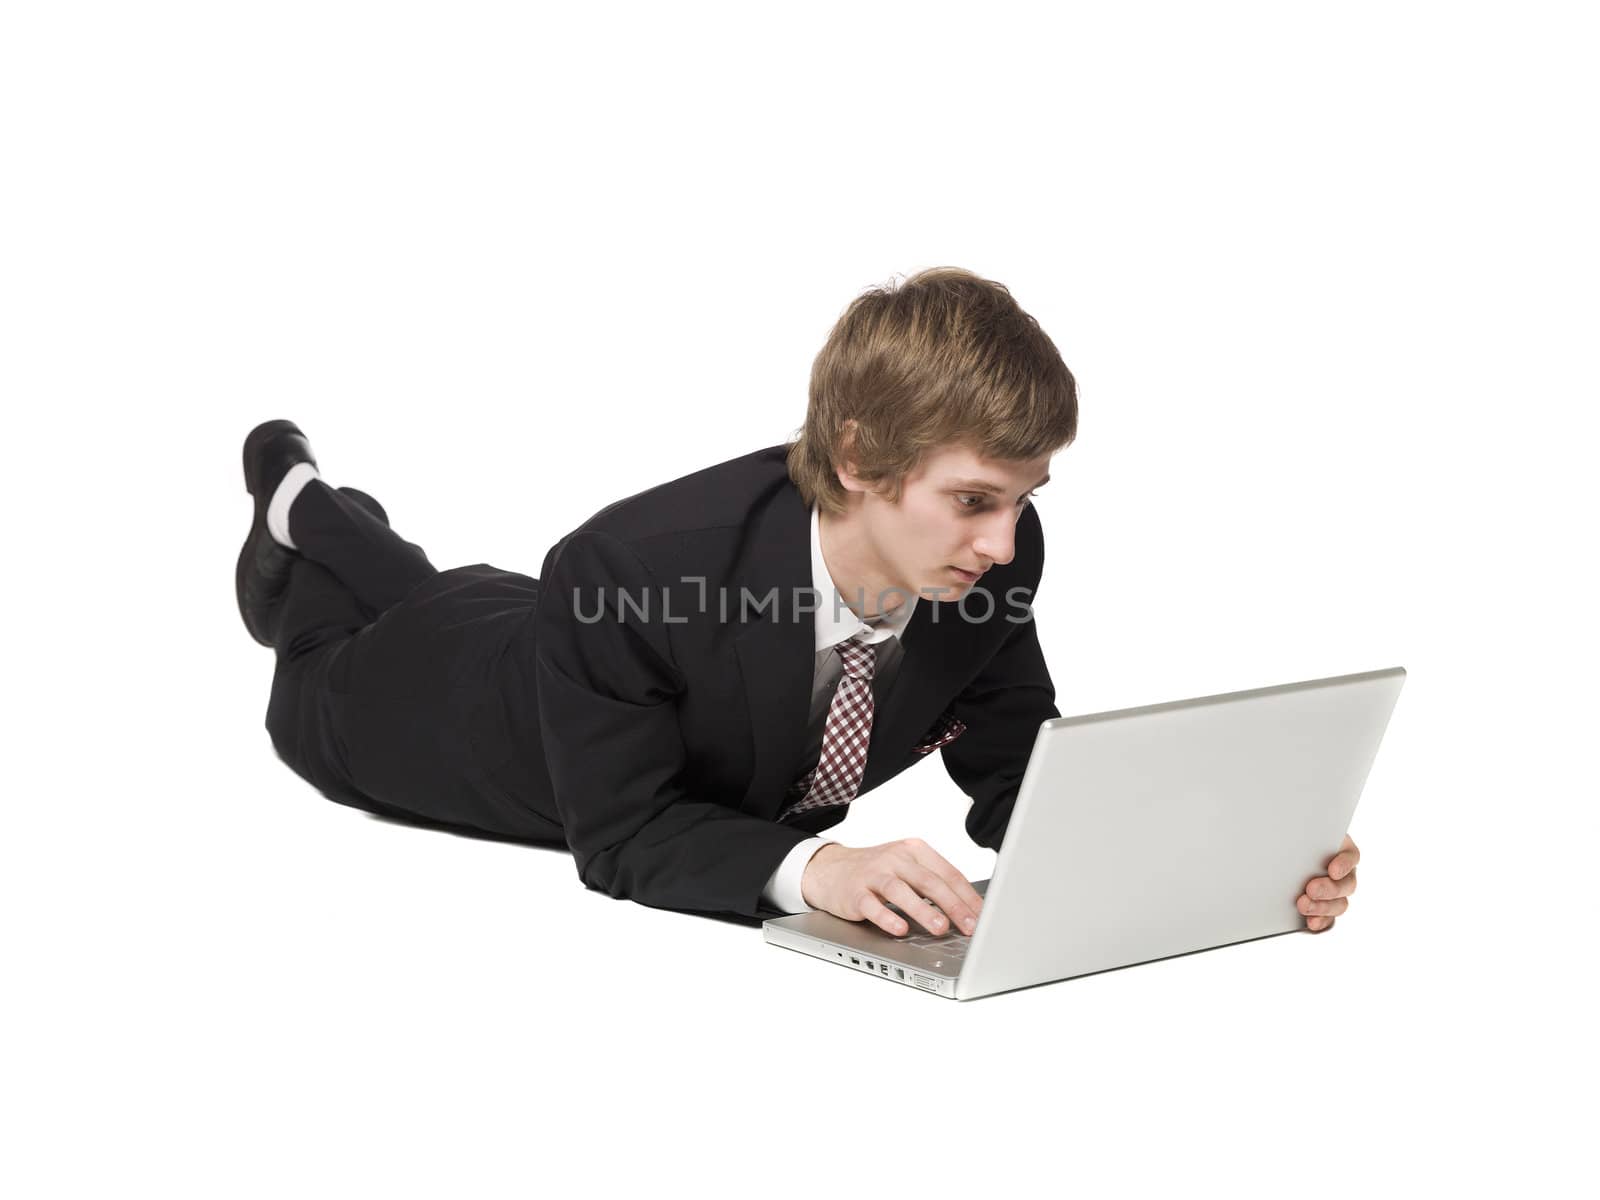 Man on the floor with a computer